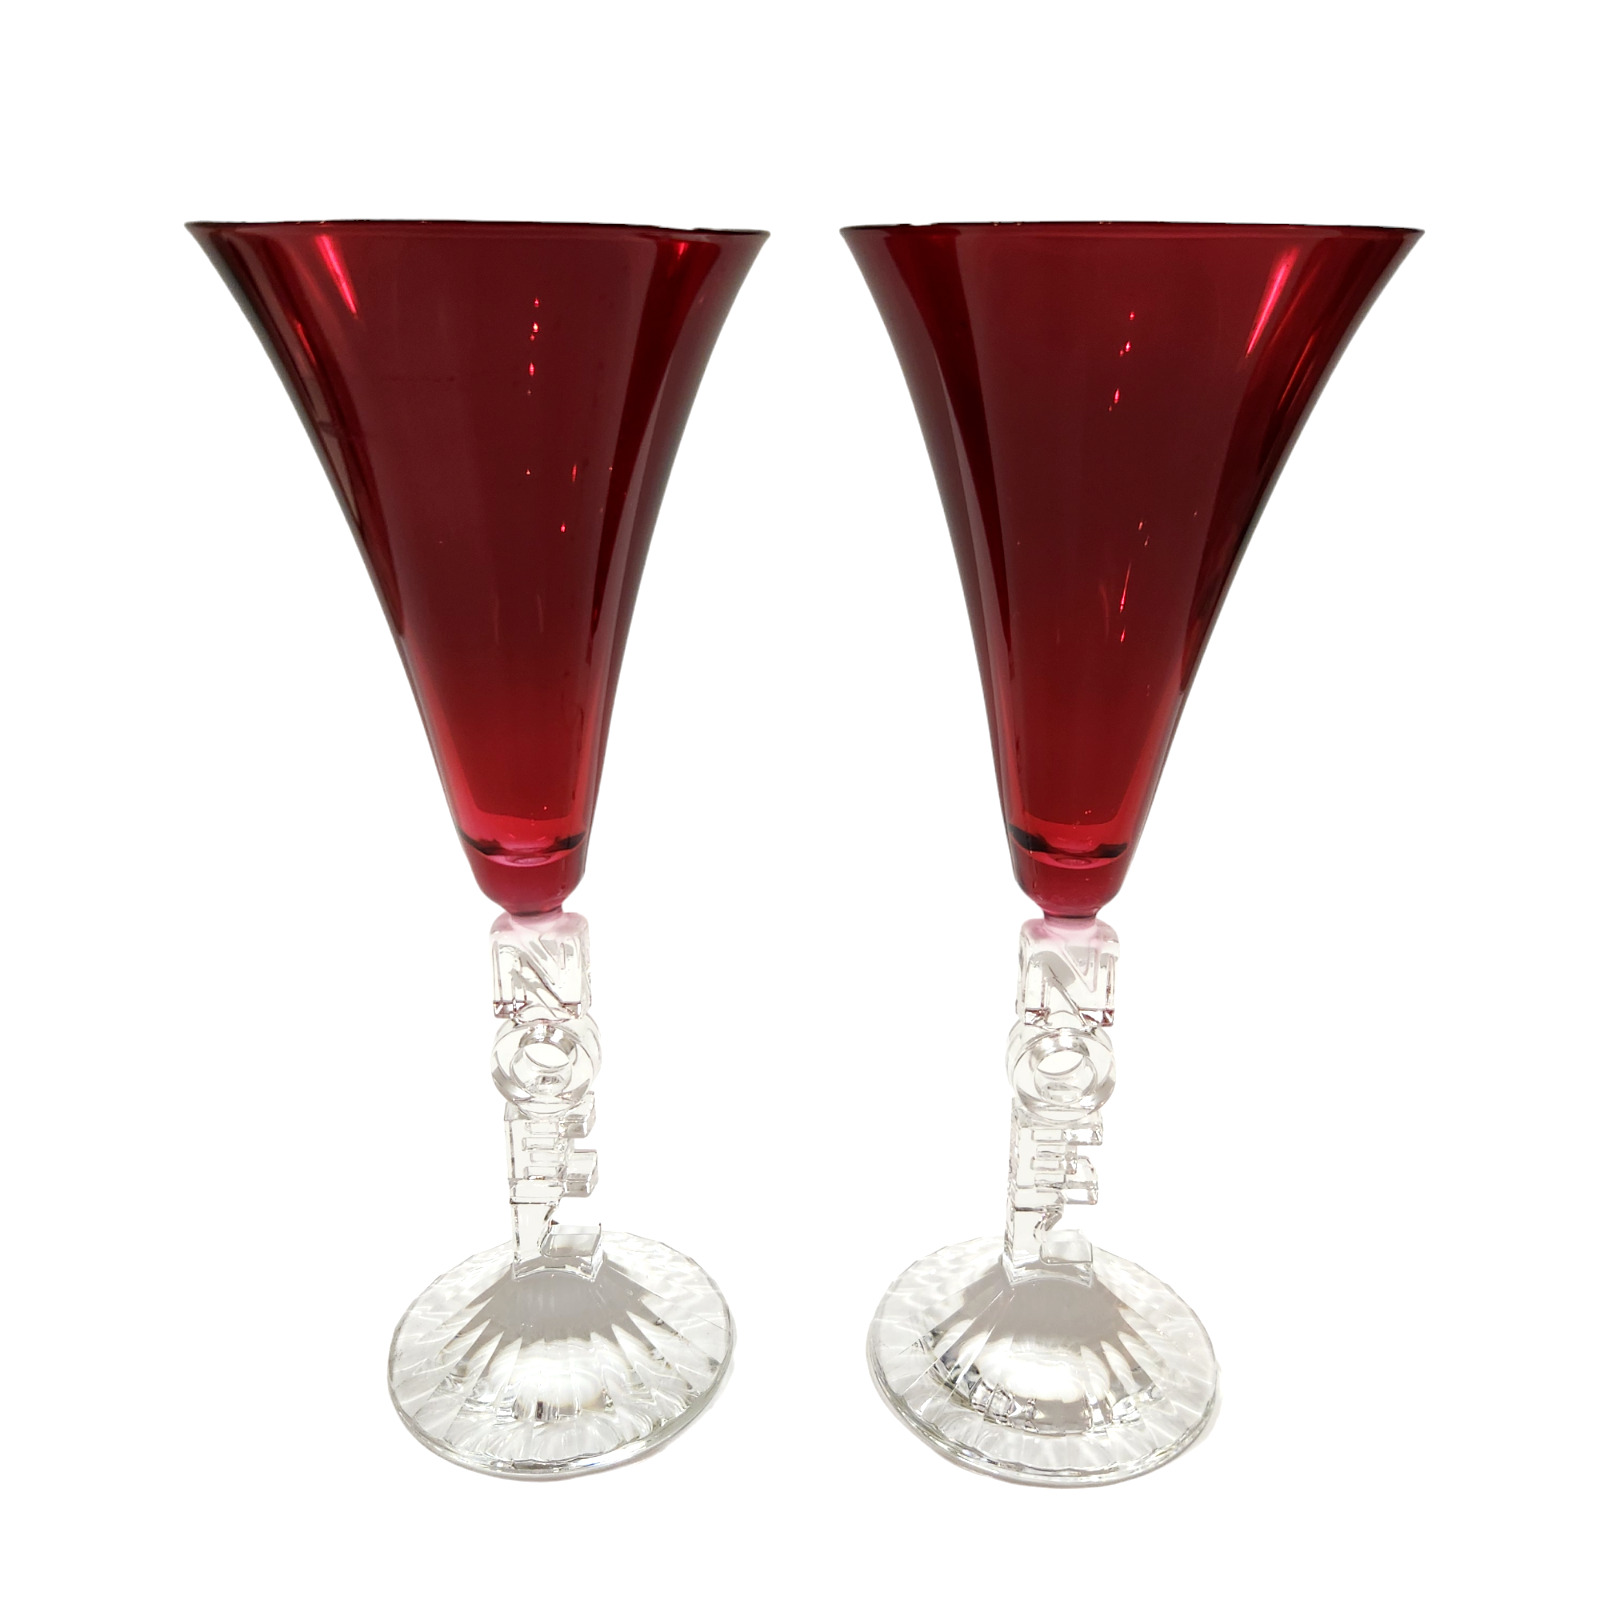 Set of 2 Crystal DArques Red Clear NOEL Christmas Champagne Flutes Glasses 8 oz